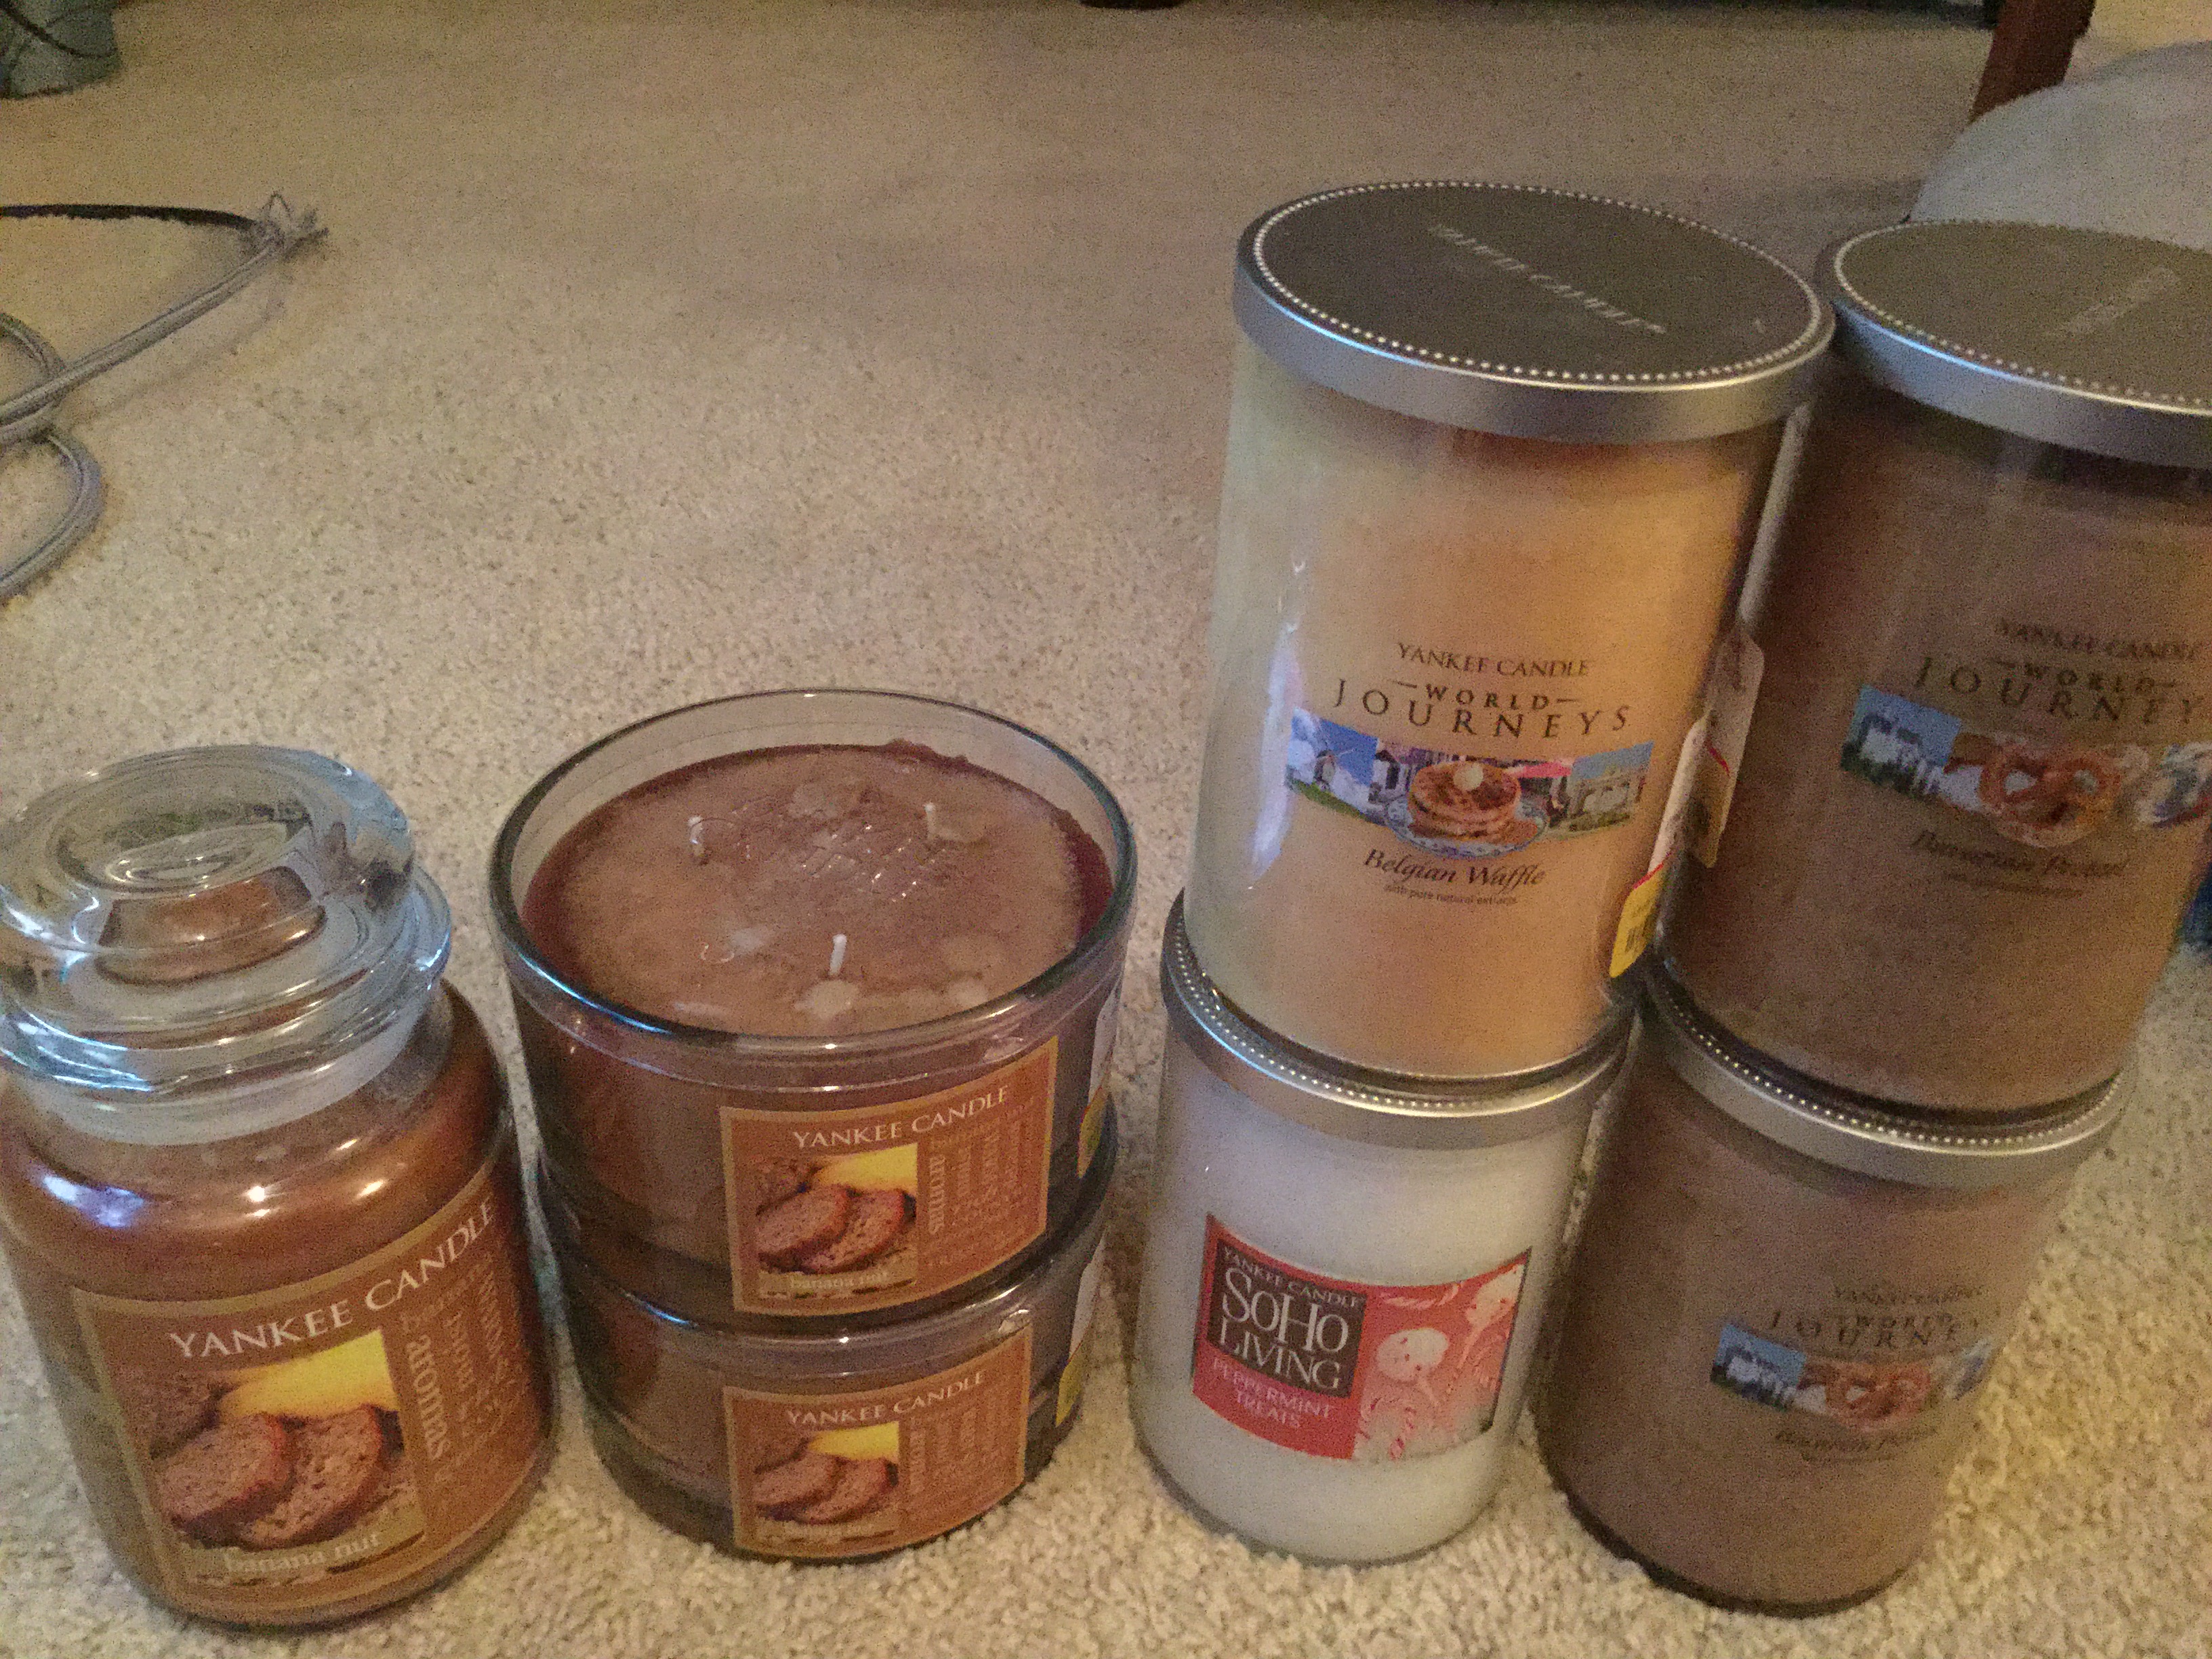 Yankee candles from Homegoods